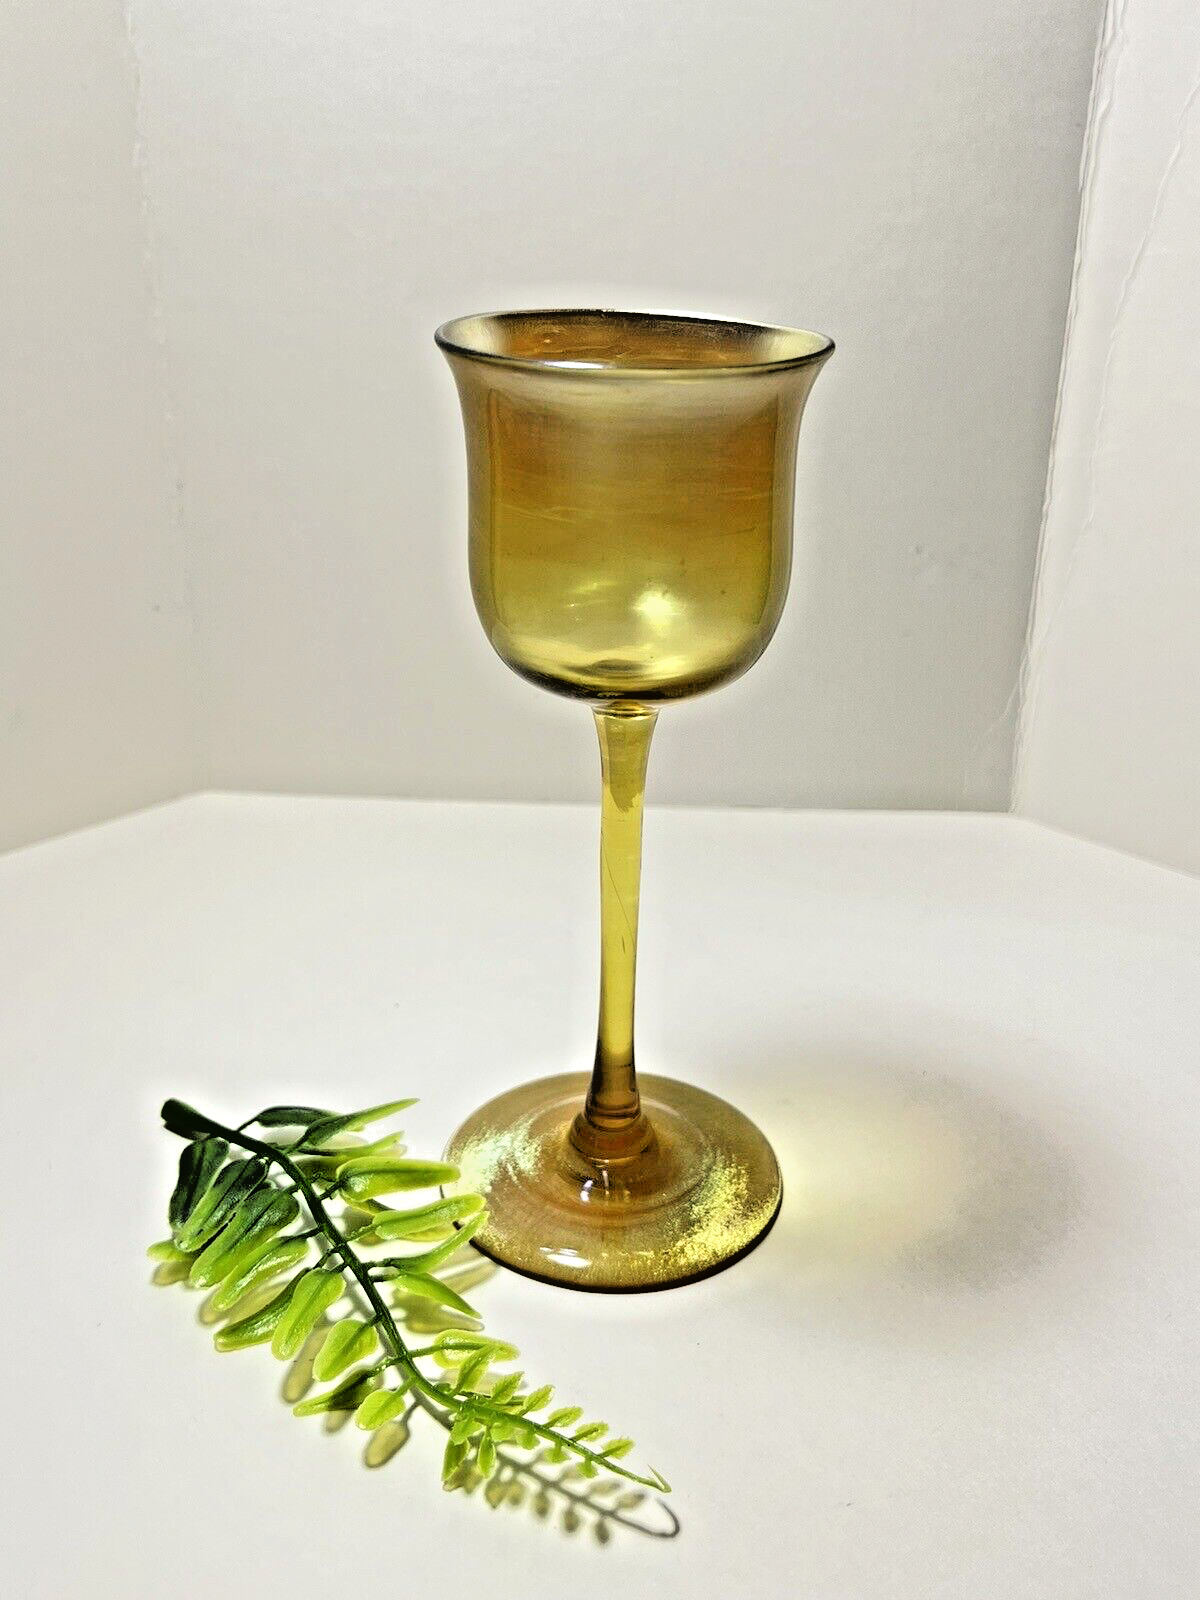 Tiffany & Co Favrile  Art Glass Signed Louis C. Tiffany Cordial 5.5